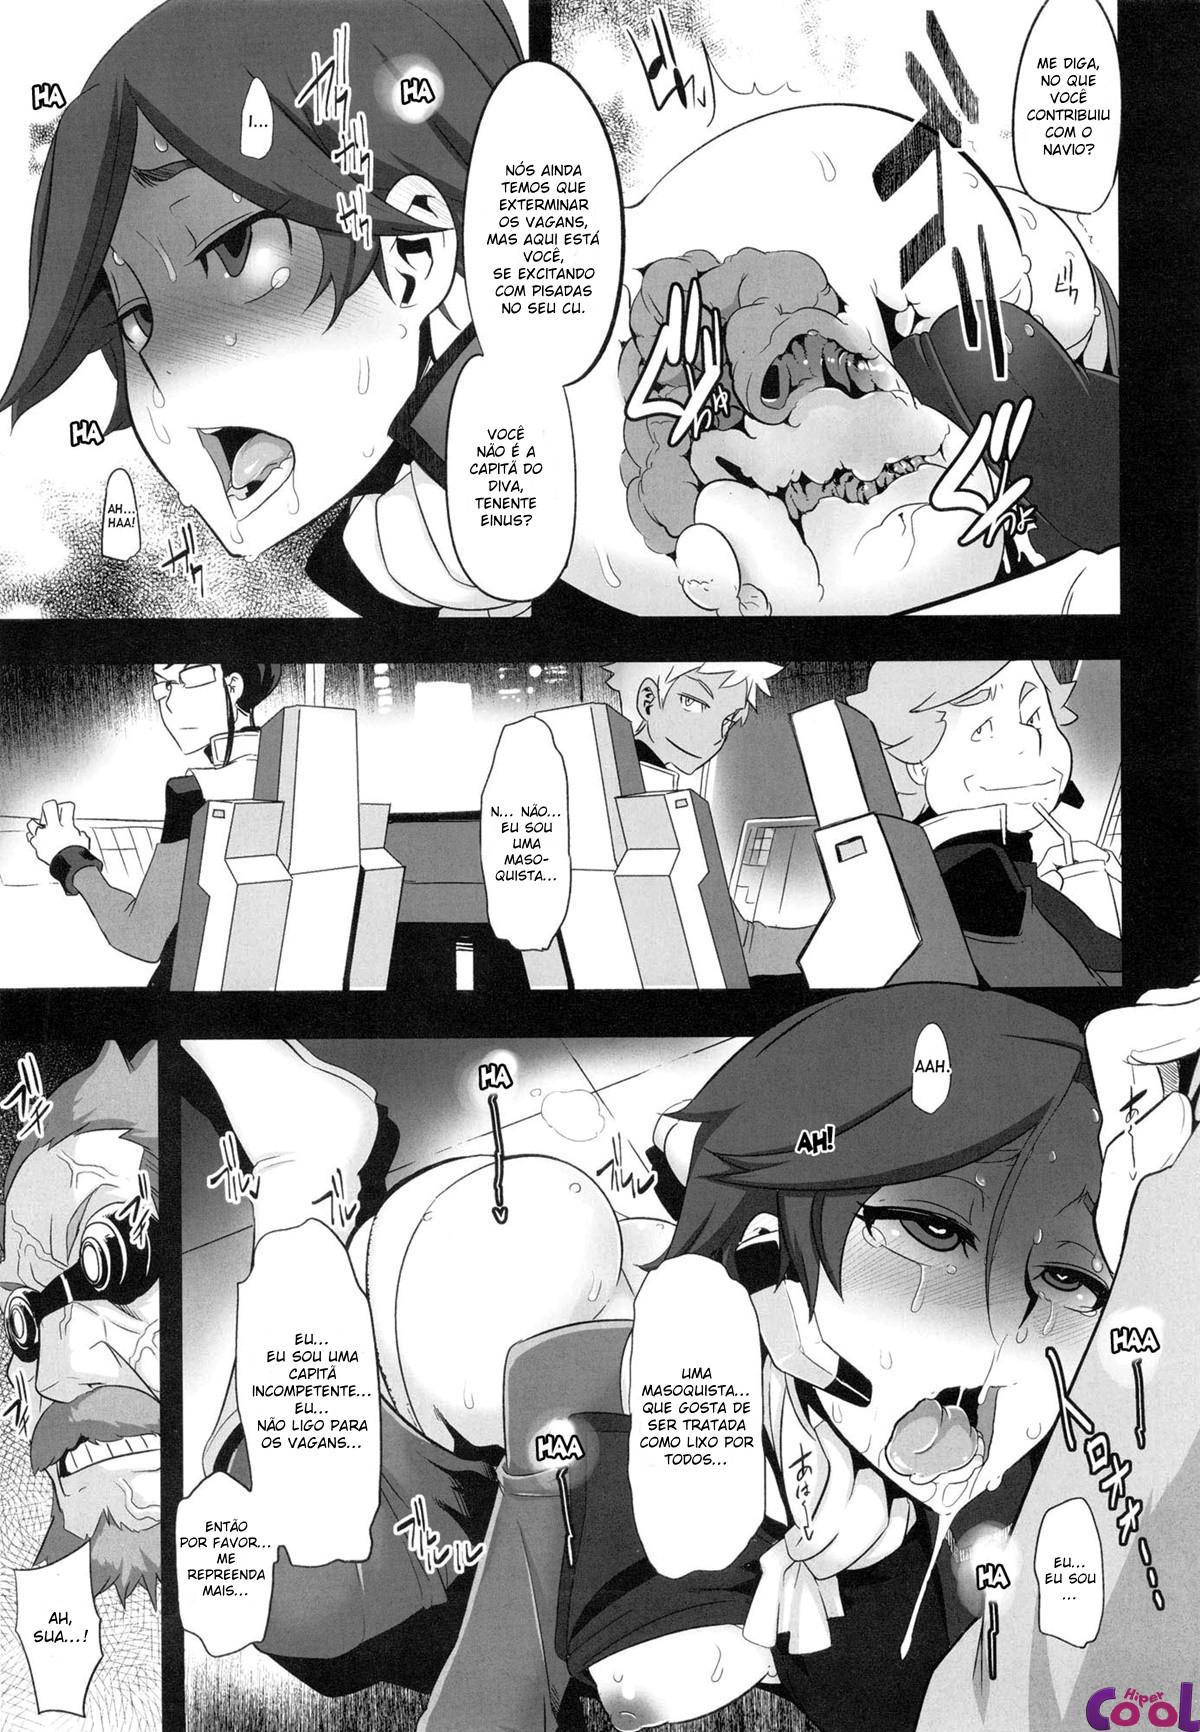 dame-kanchou-or-useless-captain-chapter-01-page-18.jpg